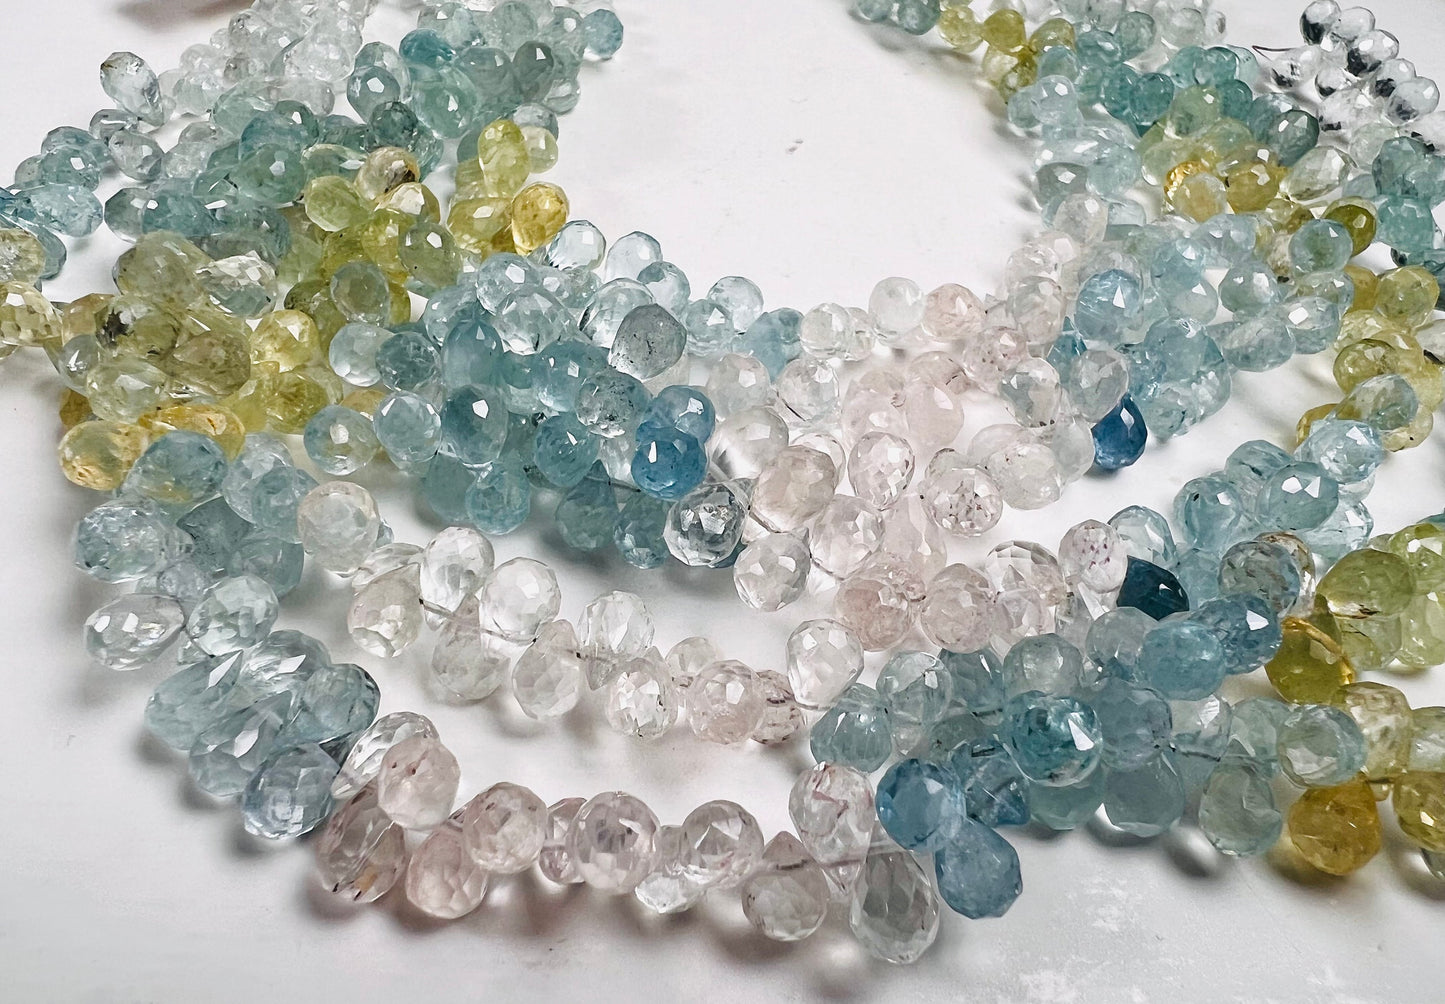 Natural Aquamarine Morganite Facetrd Briolette round Drop 6x7-8mm Jewelry Making Beads 40 pcs 1/2 approx 4” and 80 pcs approx 8” full strand